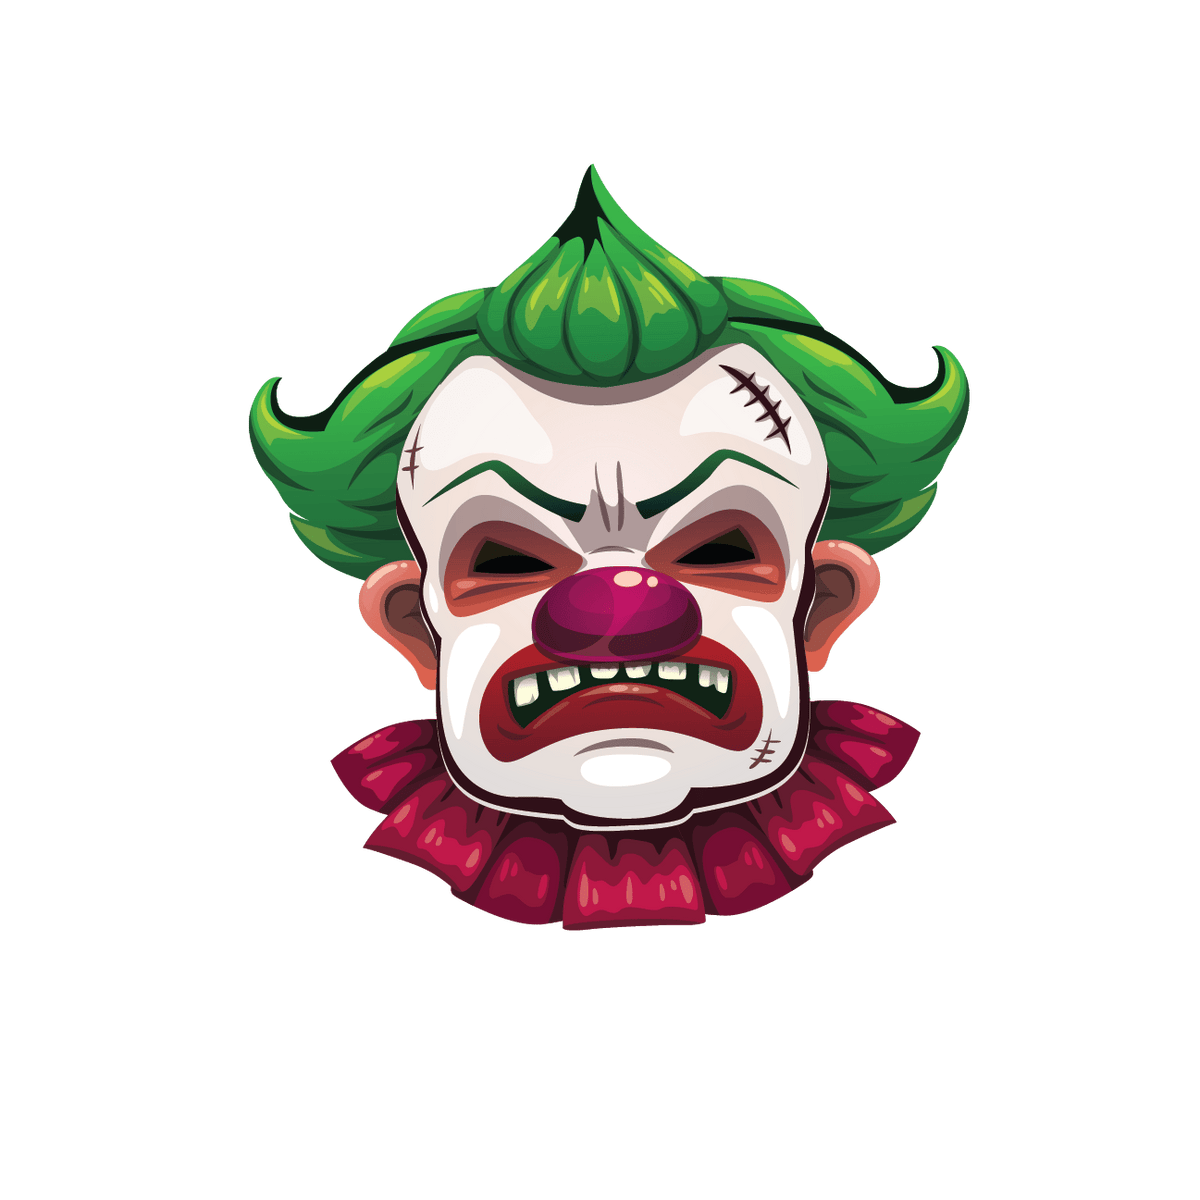 Illustration of a Cover-Alls Scary Clown with green hair, red nose, and a ruffled collar against a green background.